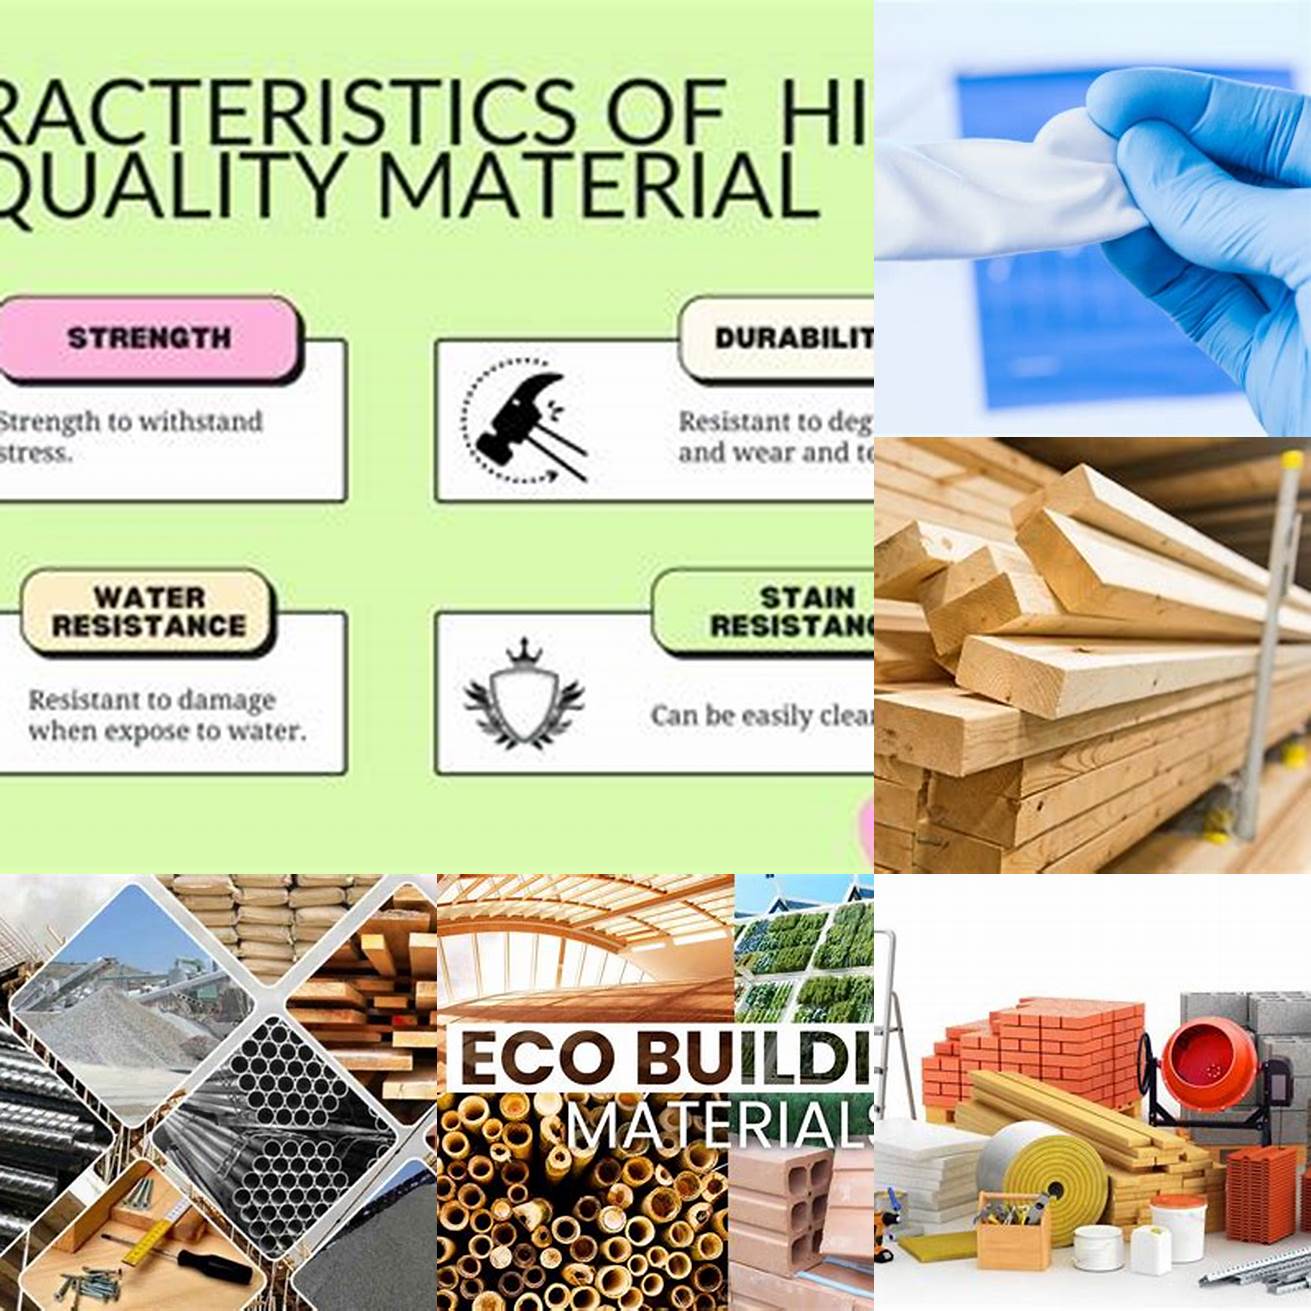 Quality Materials All of their products are made from high-quality materials ensuring durability and longevity